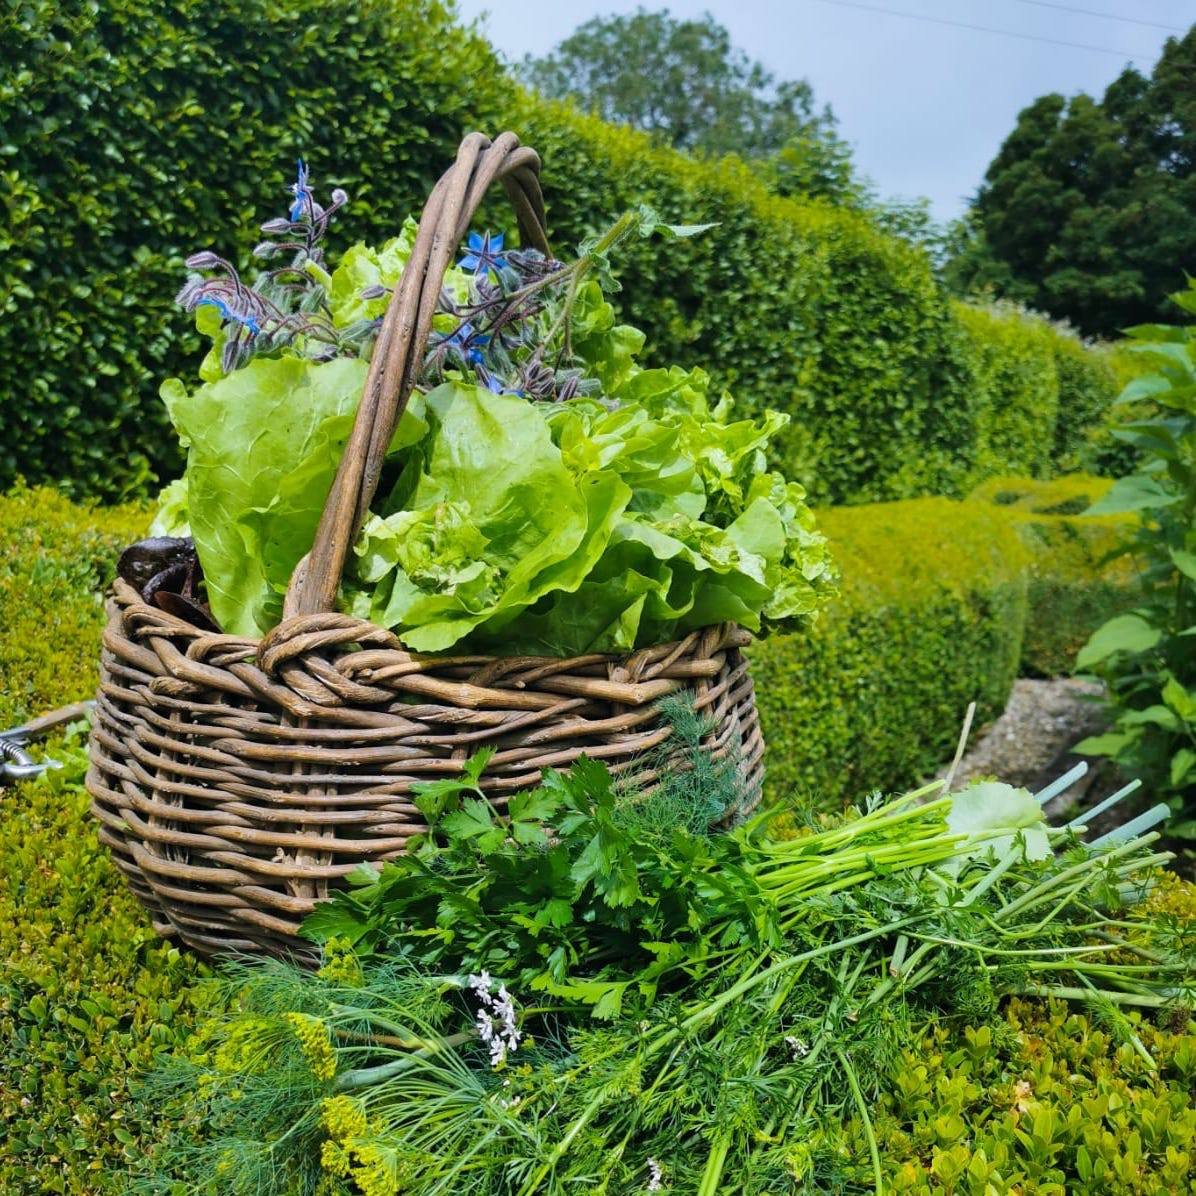 Looking for a day out to learn about growing your own food, with family or friends?

@kilmokeacountryhouse is hosting a guided tour of their gardens, learning how to grow your own food and a delicious Organic Lunch after.

For further details, and to